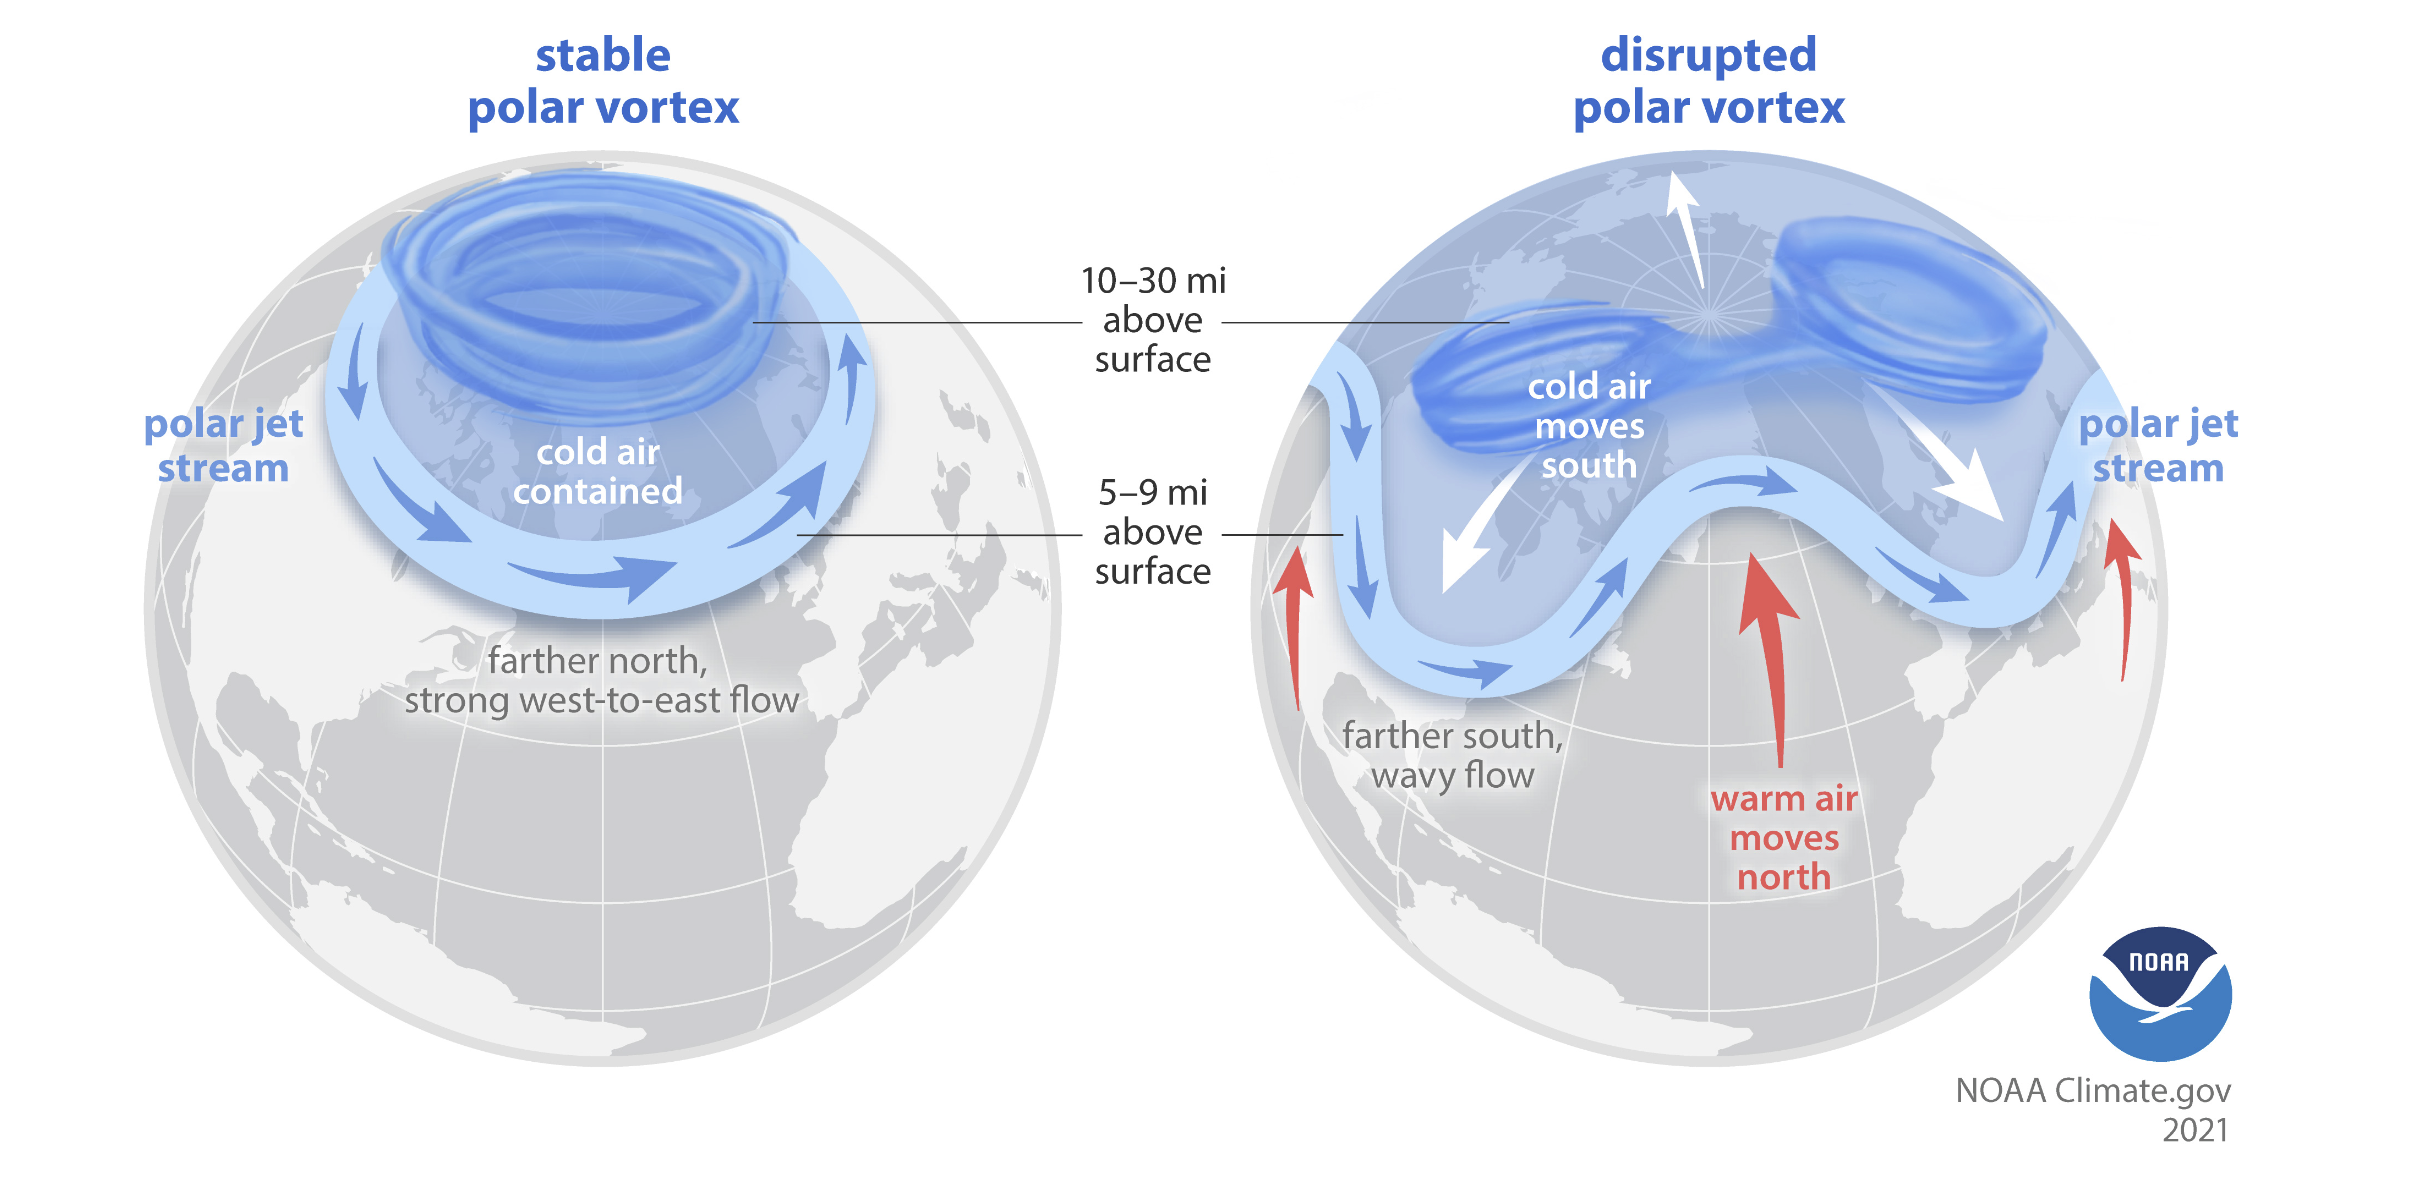 The Arctic polar vortex is a strong band of winds in the stratosphere, 10-30 miles above the surface. When this band of winds, normally ringing the North Pole, weakens, it can split. The polar jet stream can mirror this upheaval, becoming weaker or wavy. At the surface, cold air is pushed southward in some locations. Credit: NOAA